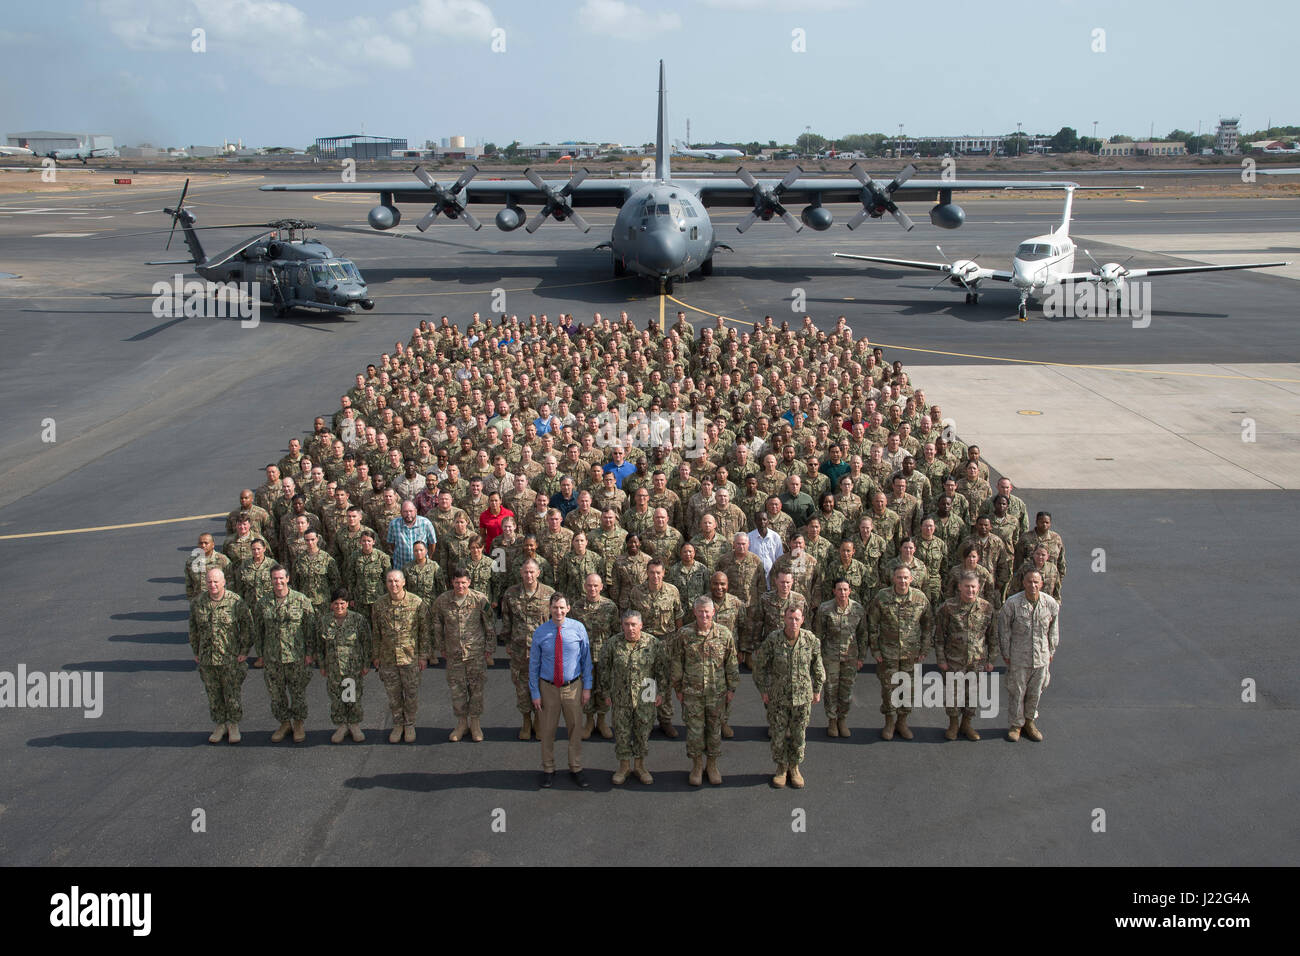 U.S. Soldiers, Sailors, Airmen, Marines, DoD civilians, and contractors representing more than 2,000 members assigned to Combined Joint Task Force-Horn of Africa assemble on the flight line at Camp Lemonnier in Djibouti, April 14, 2017. CJTF-HOA Commanding General Maj. Gen. Kurt Sonntag and Command Senior Enlisted Leader Command Master Chief Geoffrey Steffee, will conclude their tour after a change of command ceremony on April 28. (U.S. Air National Guard photo by Master Sgt. Paul Gorman) Stock Photo